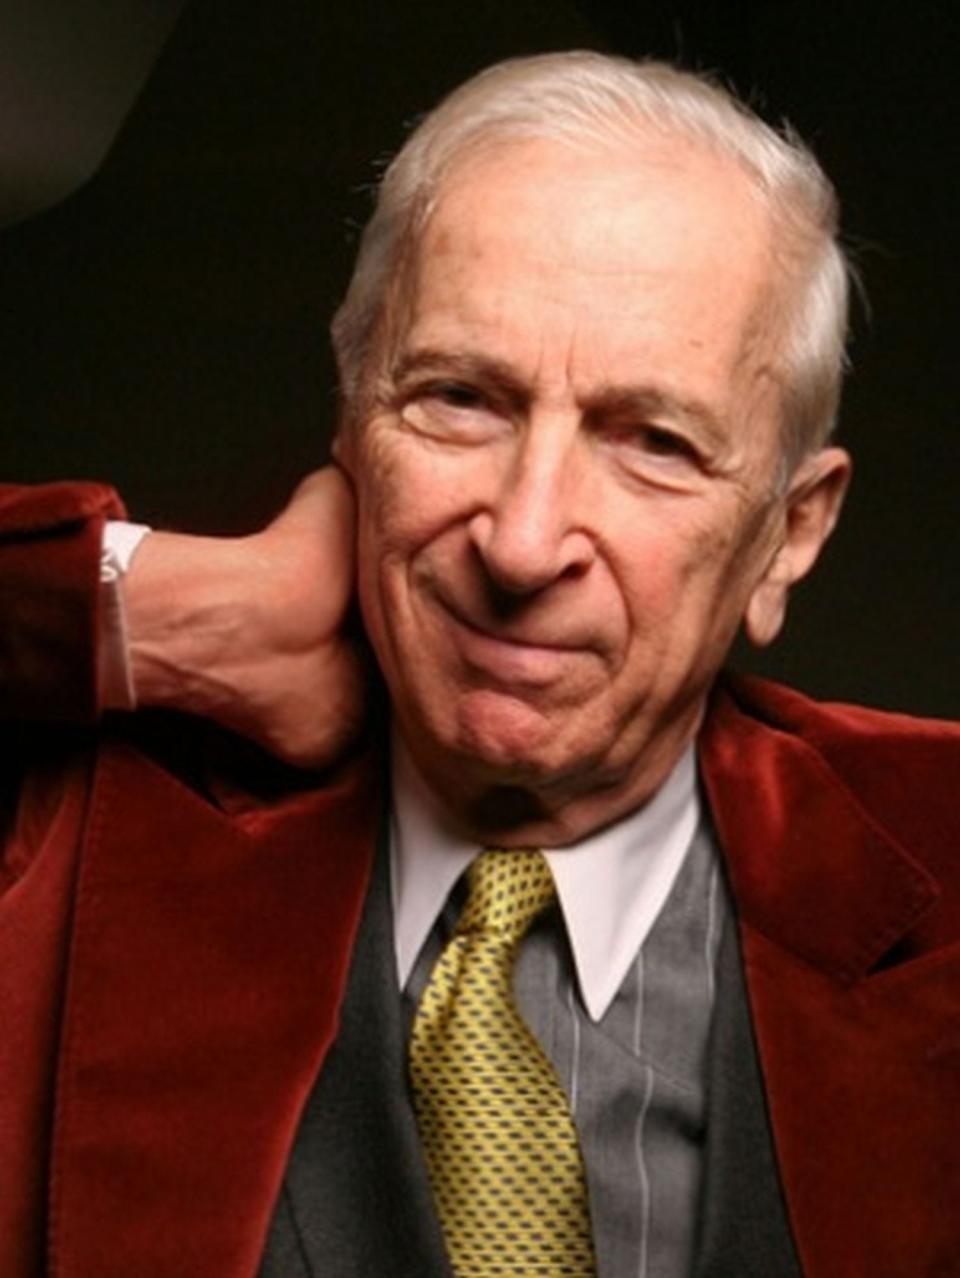 Gay Talese graduated from the University of Alabama in 1953 before embarking on a journalism career at the New York Times. He has written 16 books.